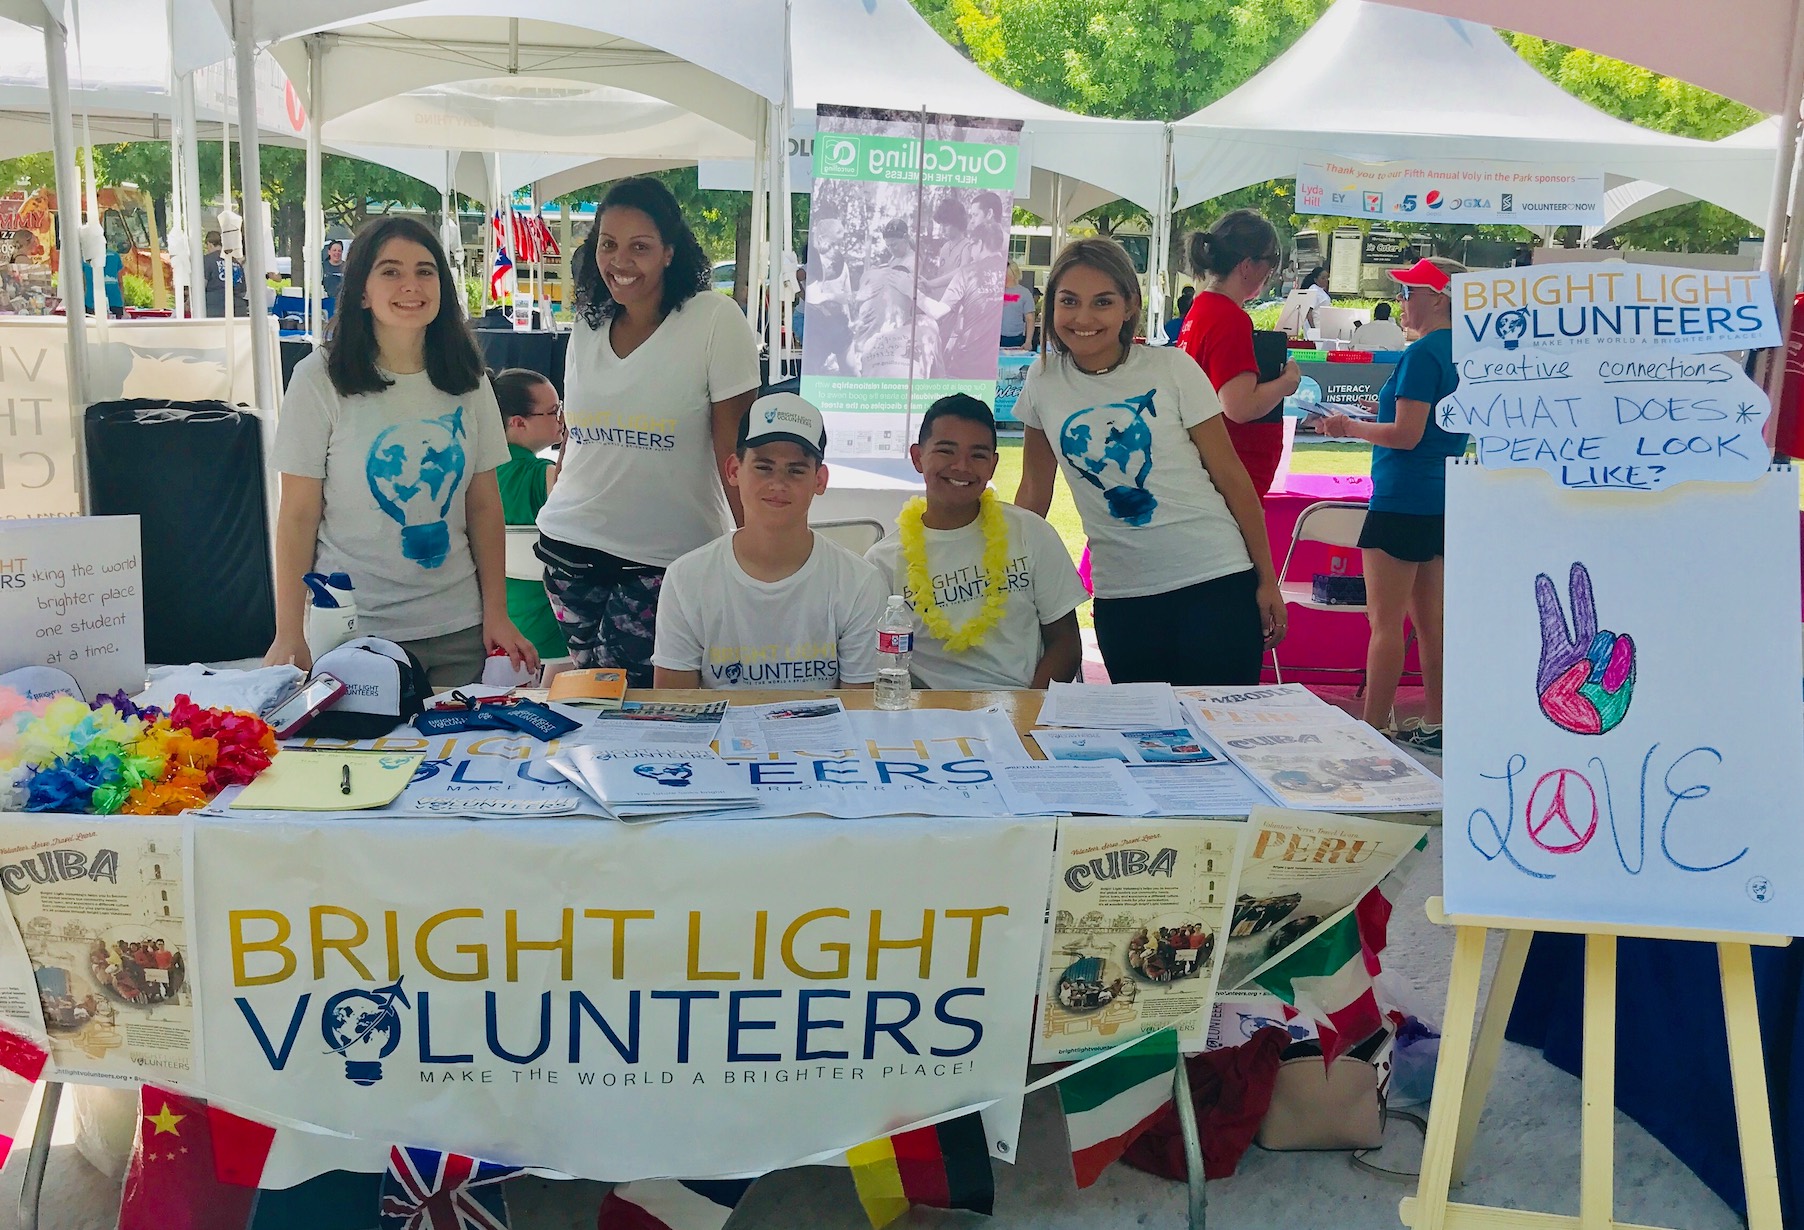 The mission of Bright Light Volunteers is to make the world a brighter place by providing educational service opportunities that foster the development of global leaders and citizens.